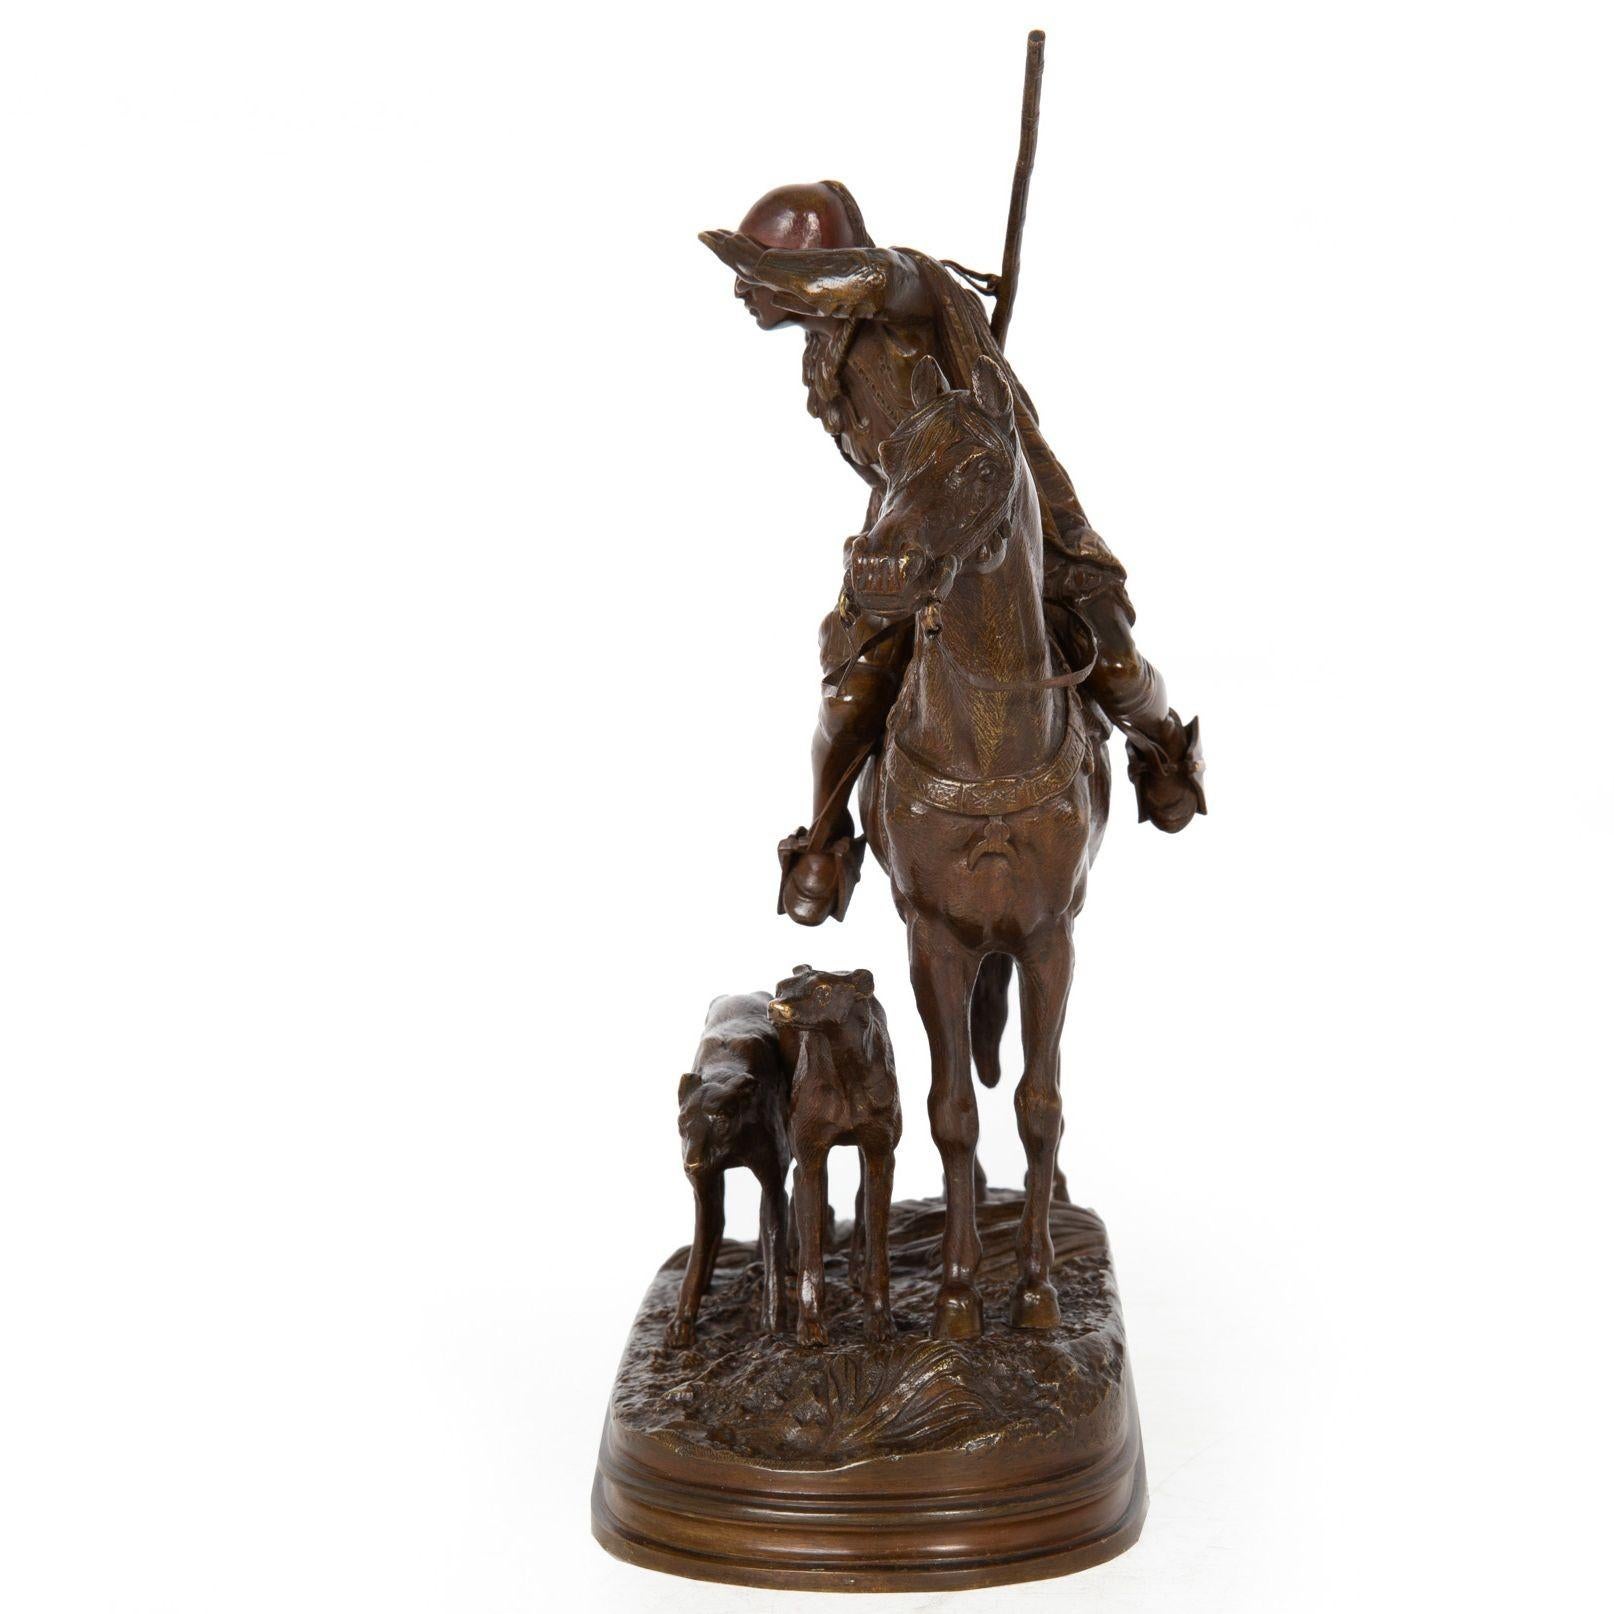 French Bronze Sculpture “Arab Hunter on Horseback” by Alfred Dubucand